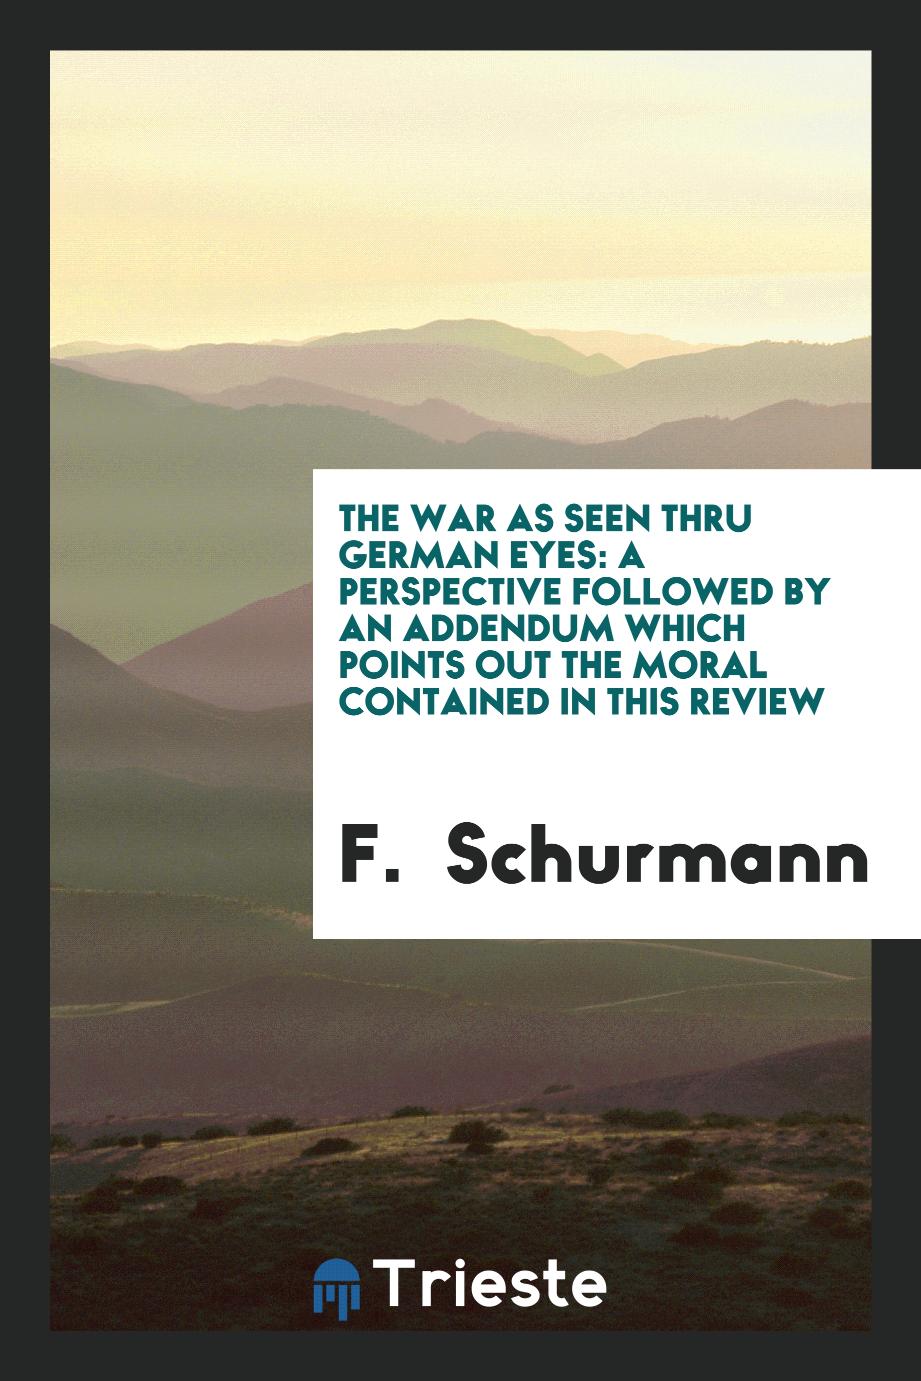 The War as Seen Thru German Eyes: A Perspective Followed by an Addendum which Points Out the Moral Contained in this Review